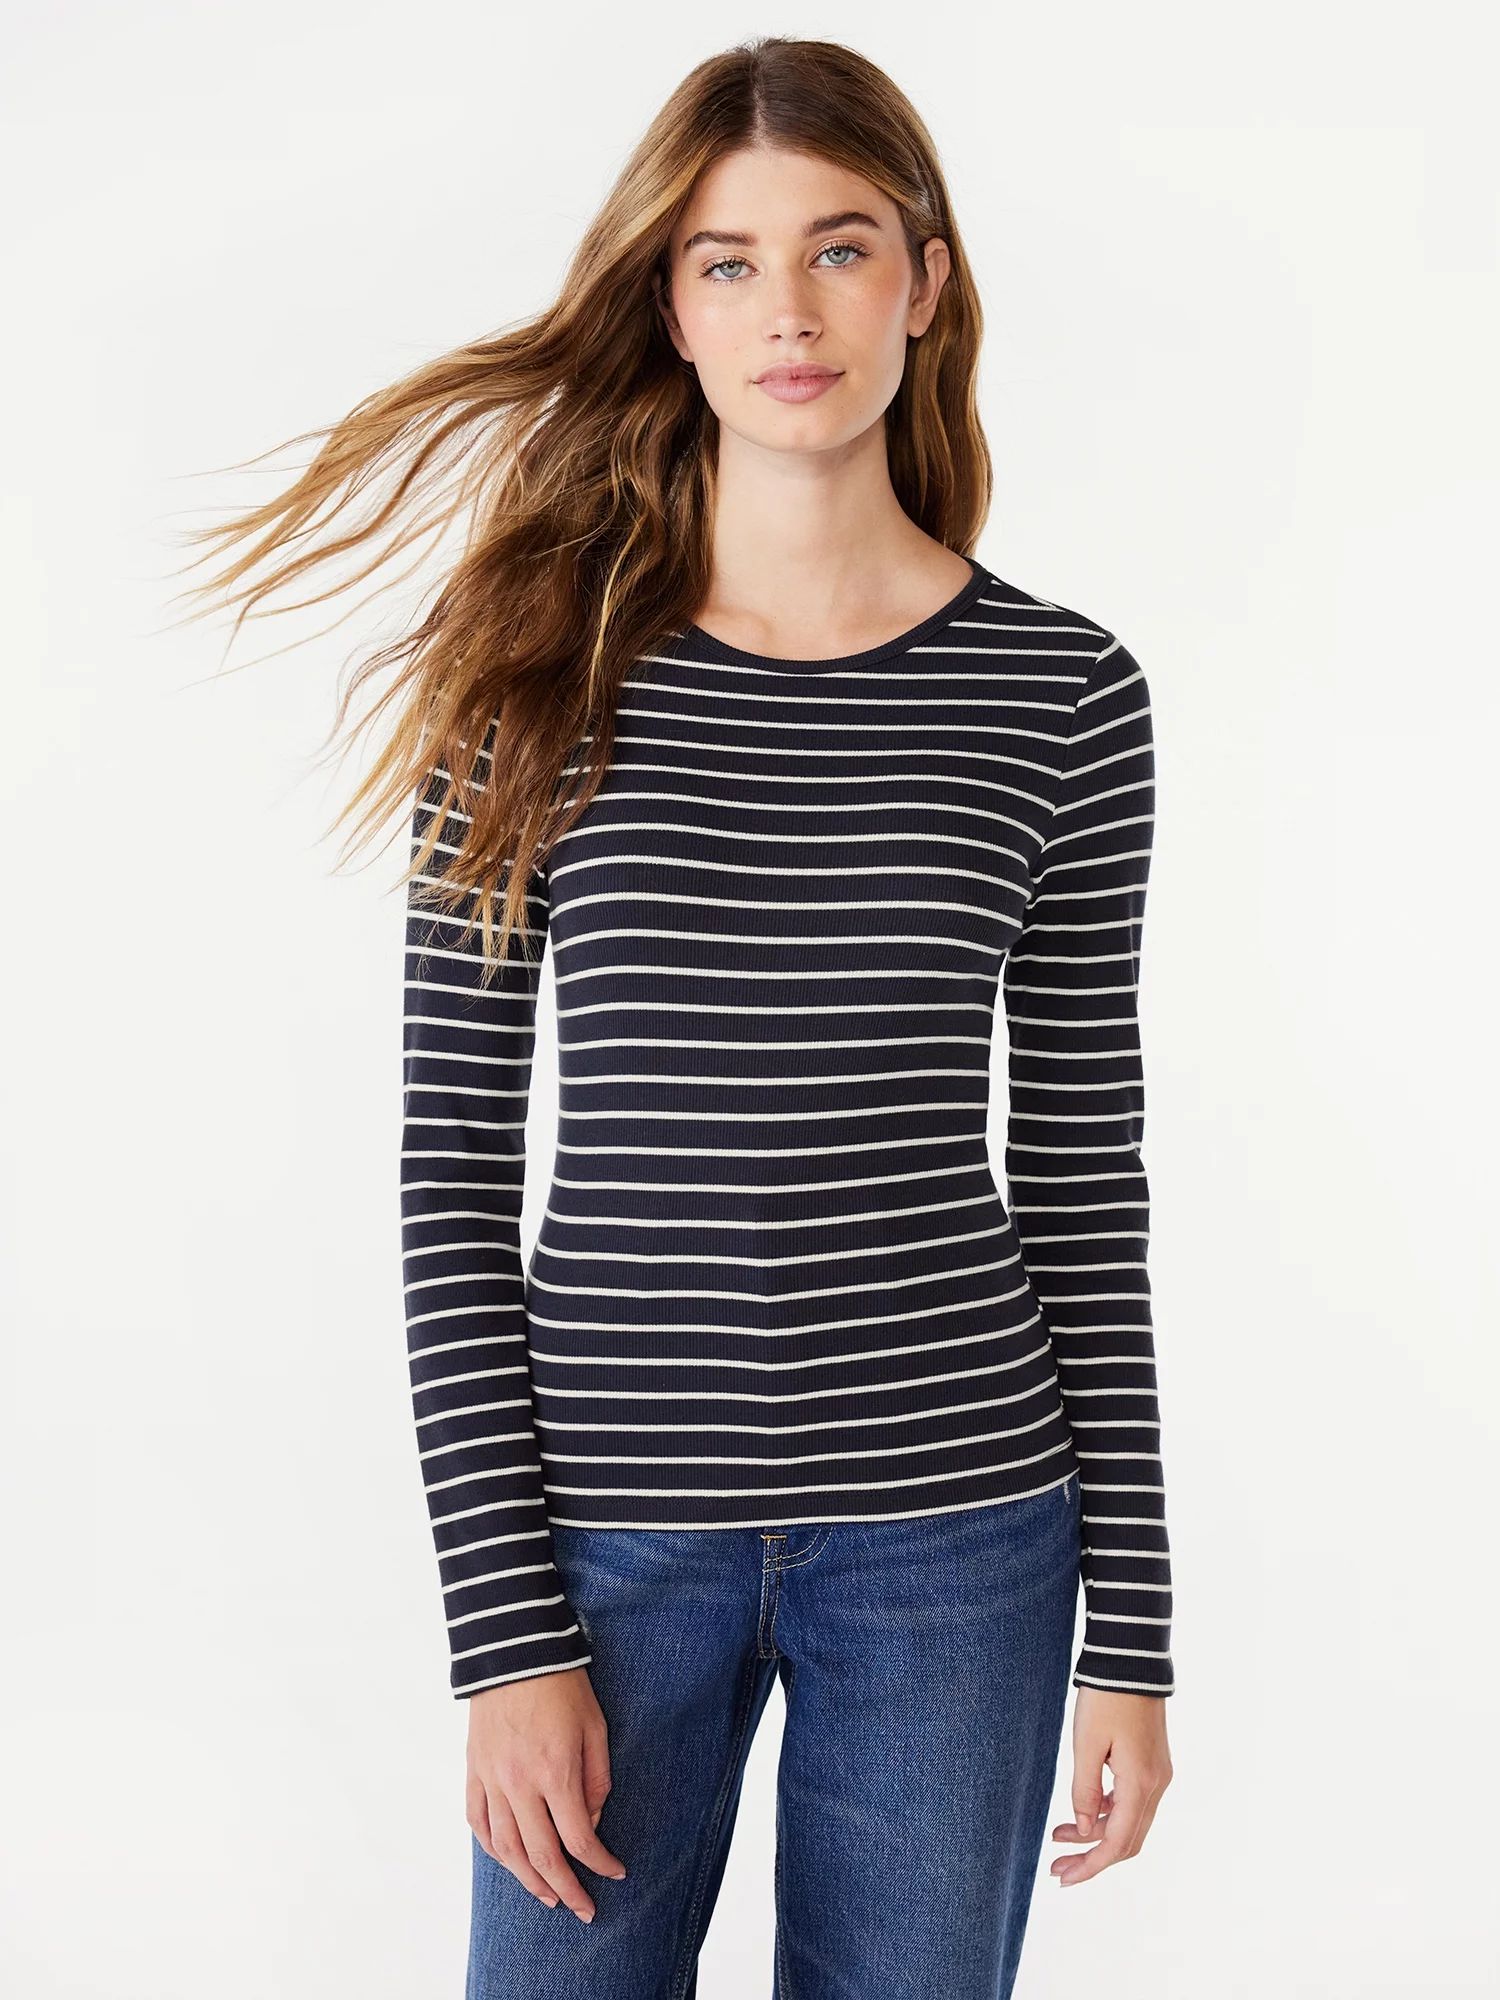 Free Assembly Women's Ribbed Crewneck T-Shirt with Long Sleeves, Sizes XS-XXL | Walmart (US)